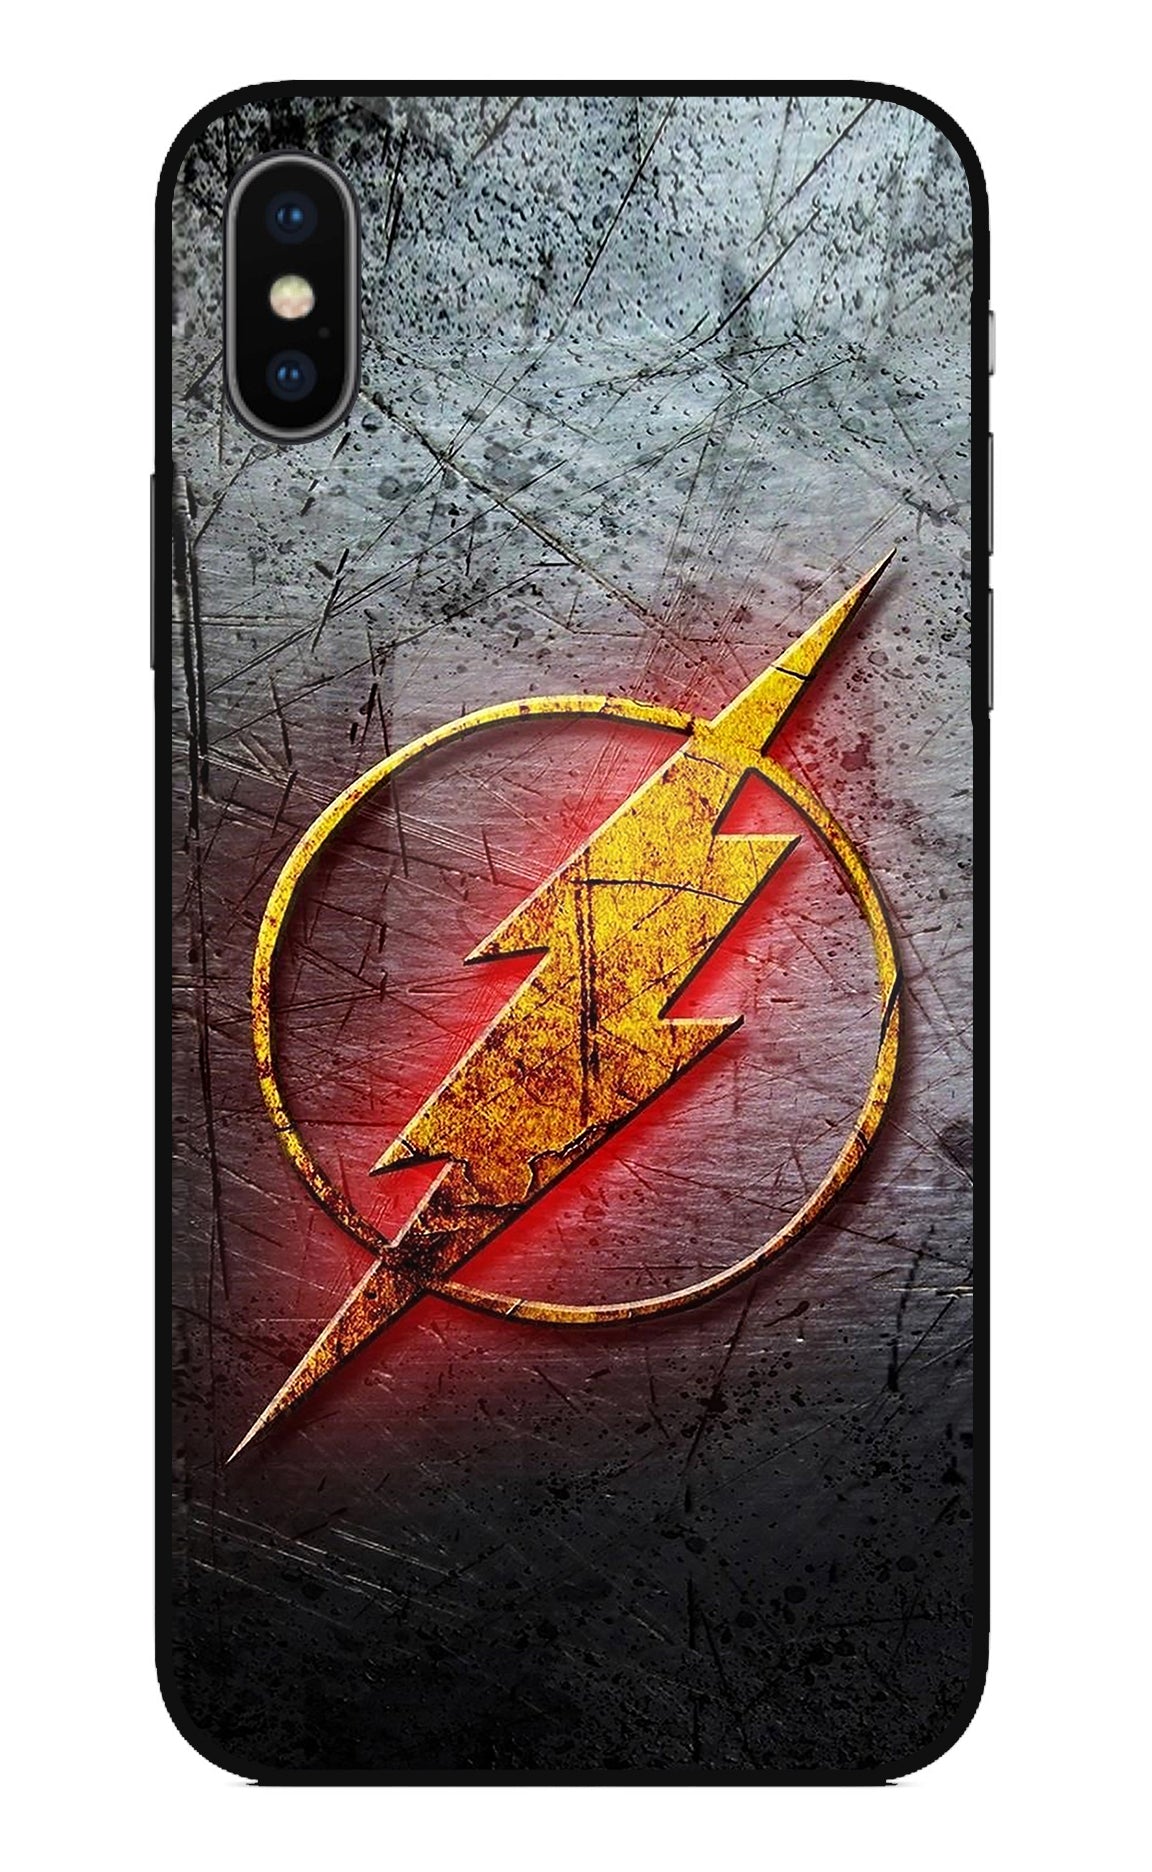 Flash iPhone X Back Cover